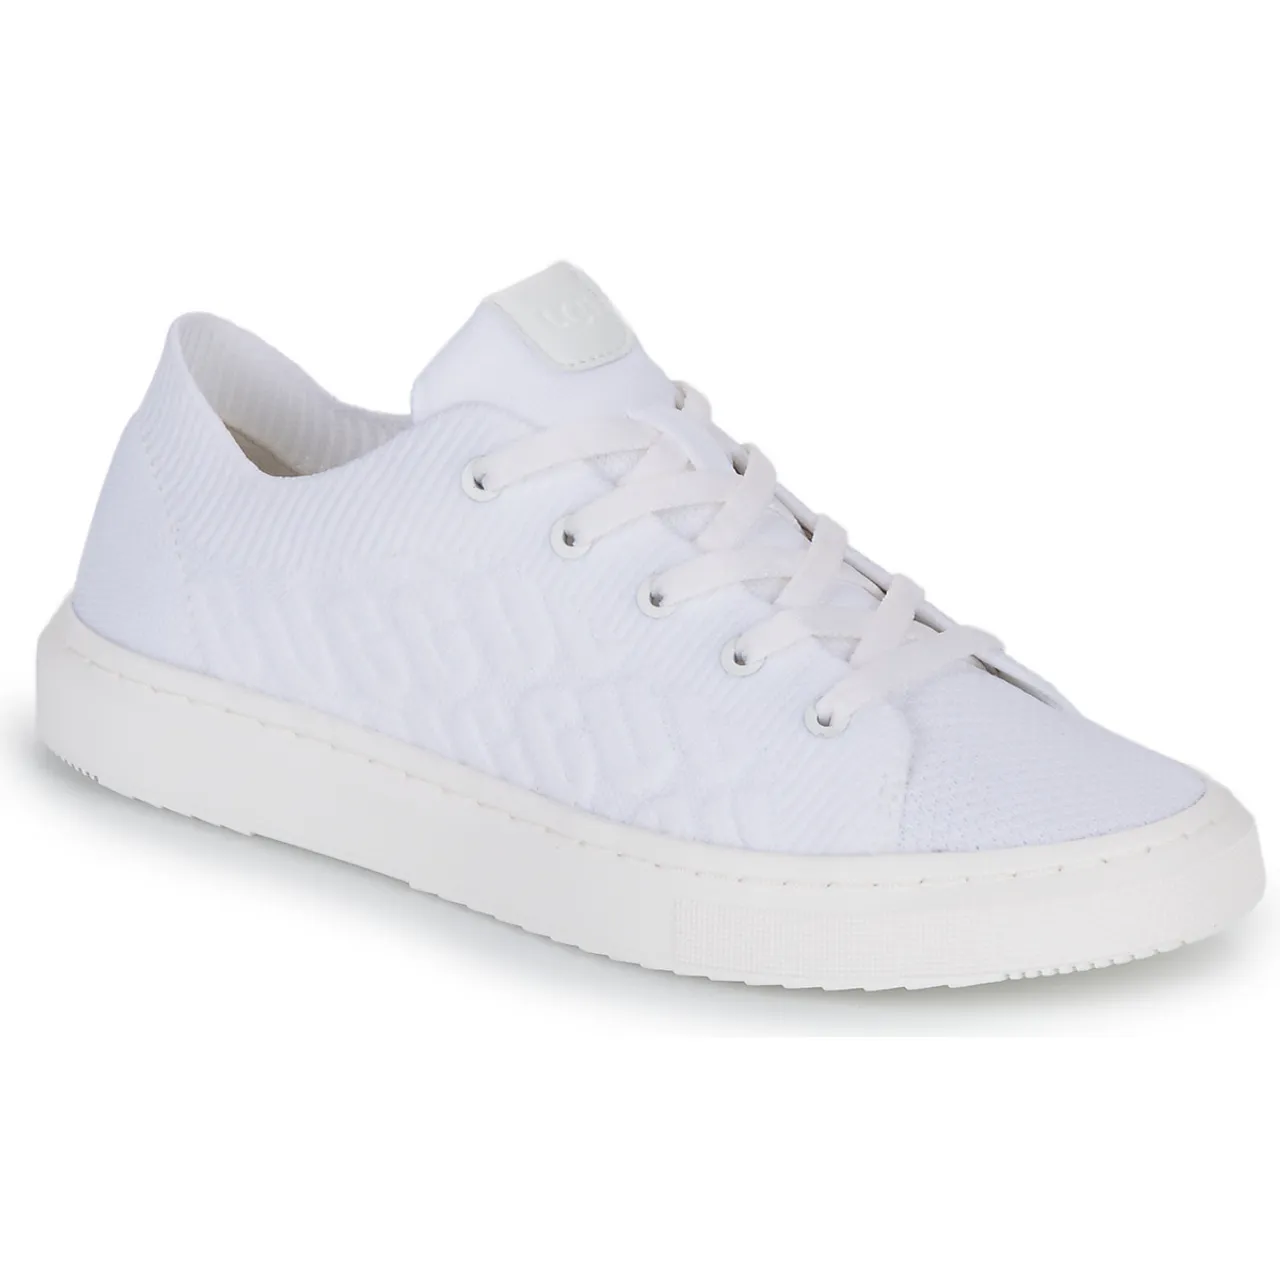 UGG  W ALAMEDA GRAPHIC KNIT  women's Shoes (Trainers) in White